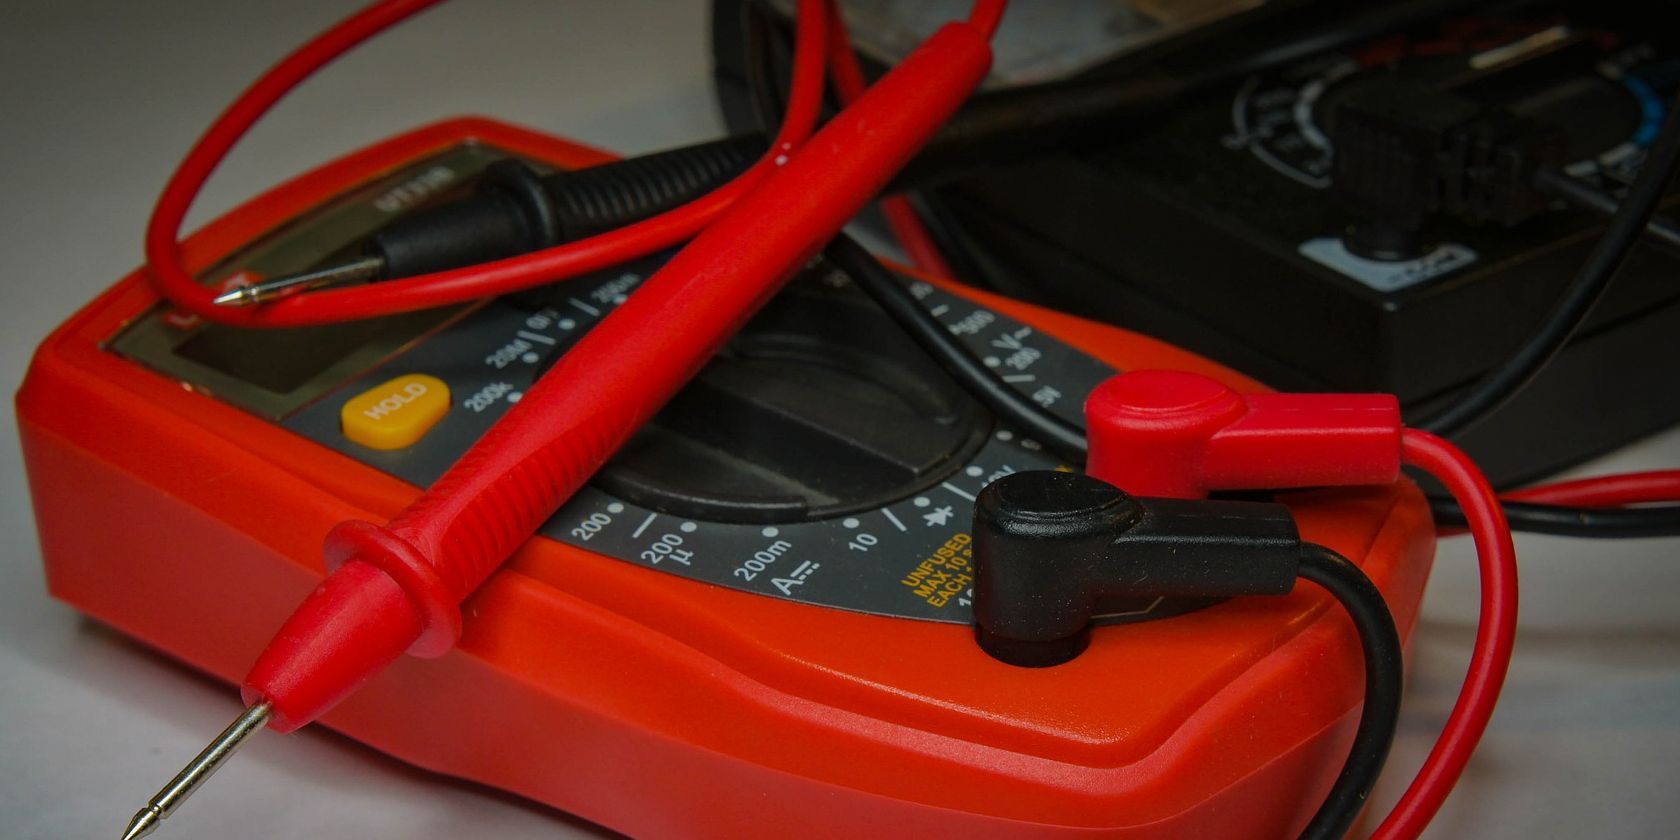 Multimeter Placed on a Table With Test Leads Inserted in Plugs